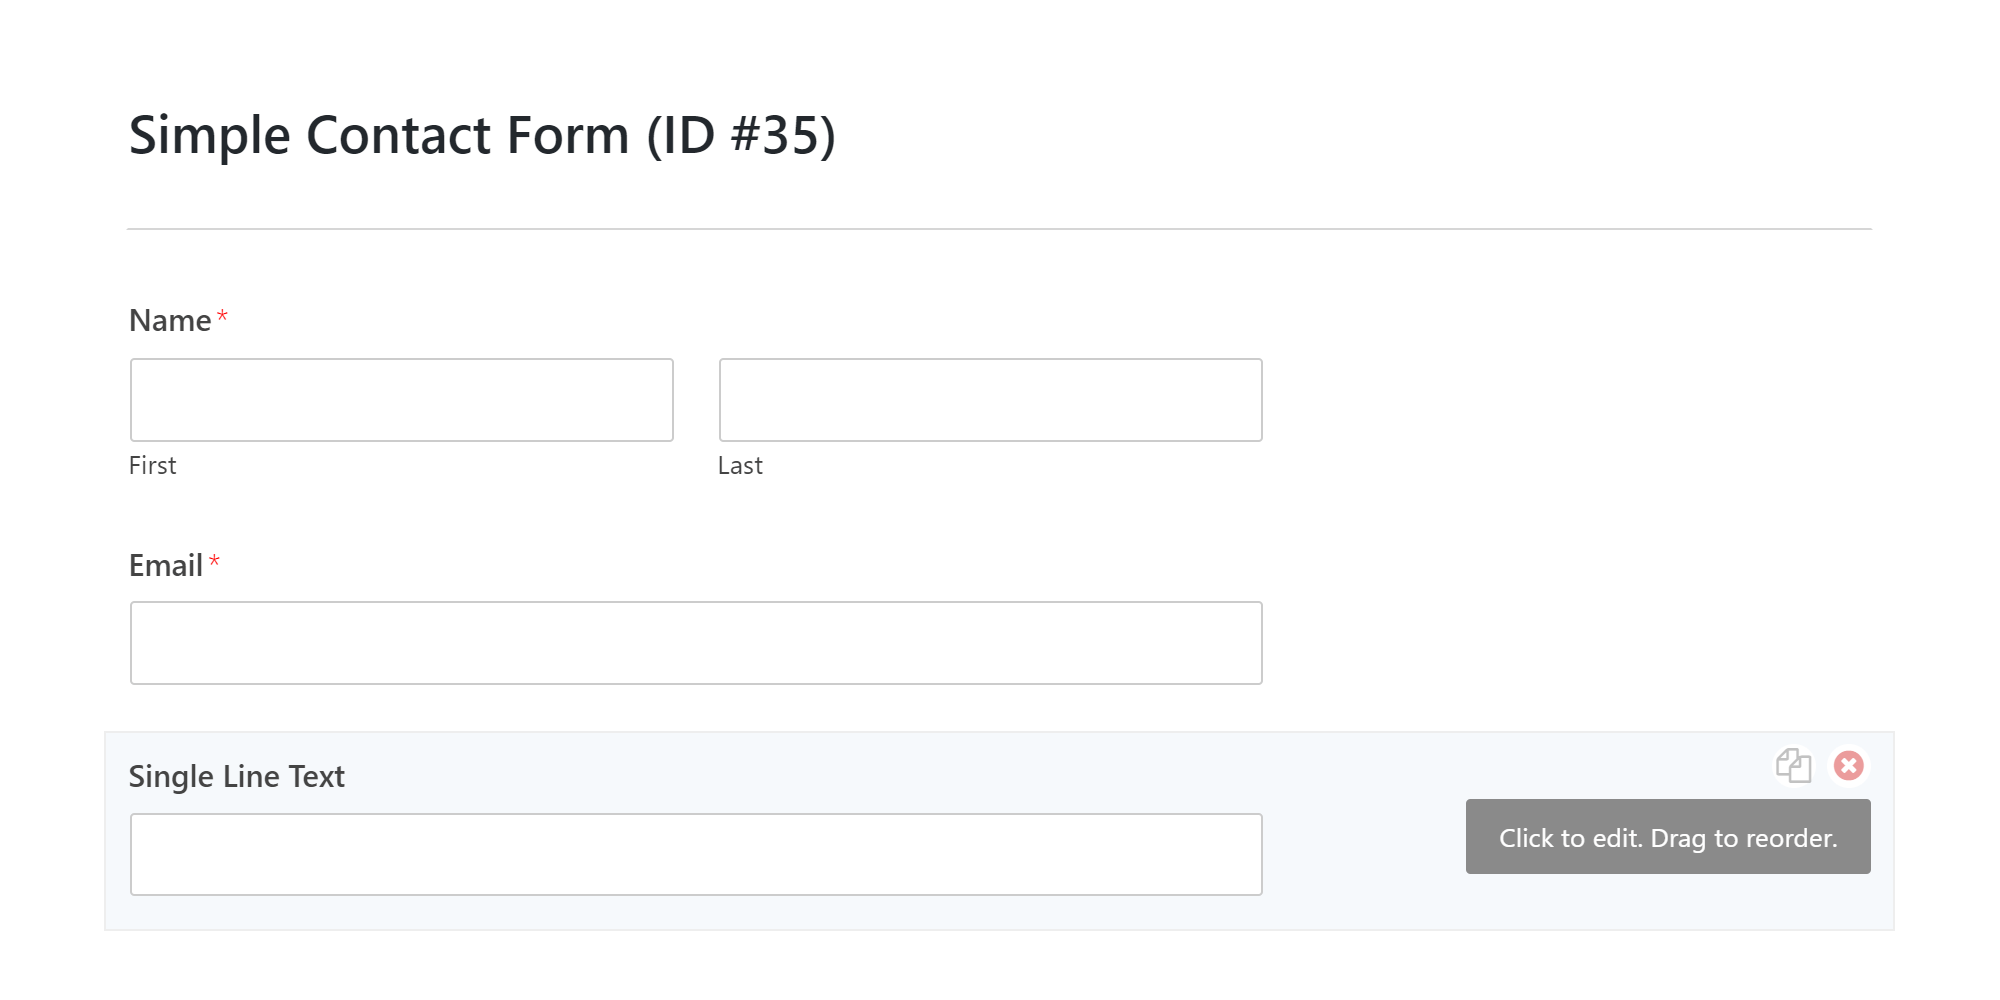 Add a Field to the Form